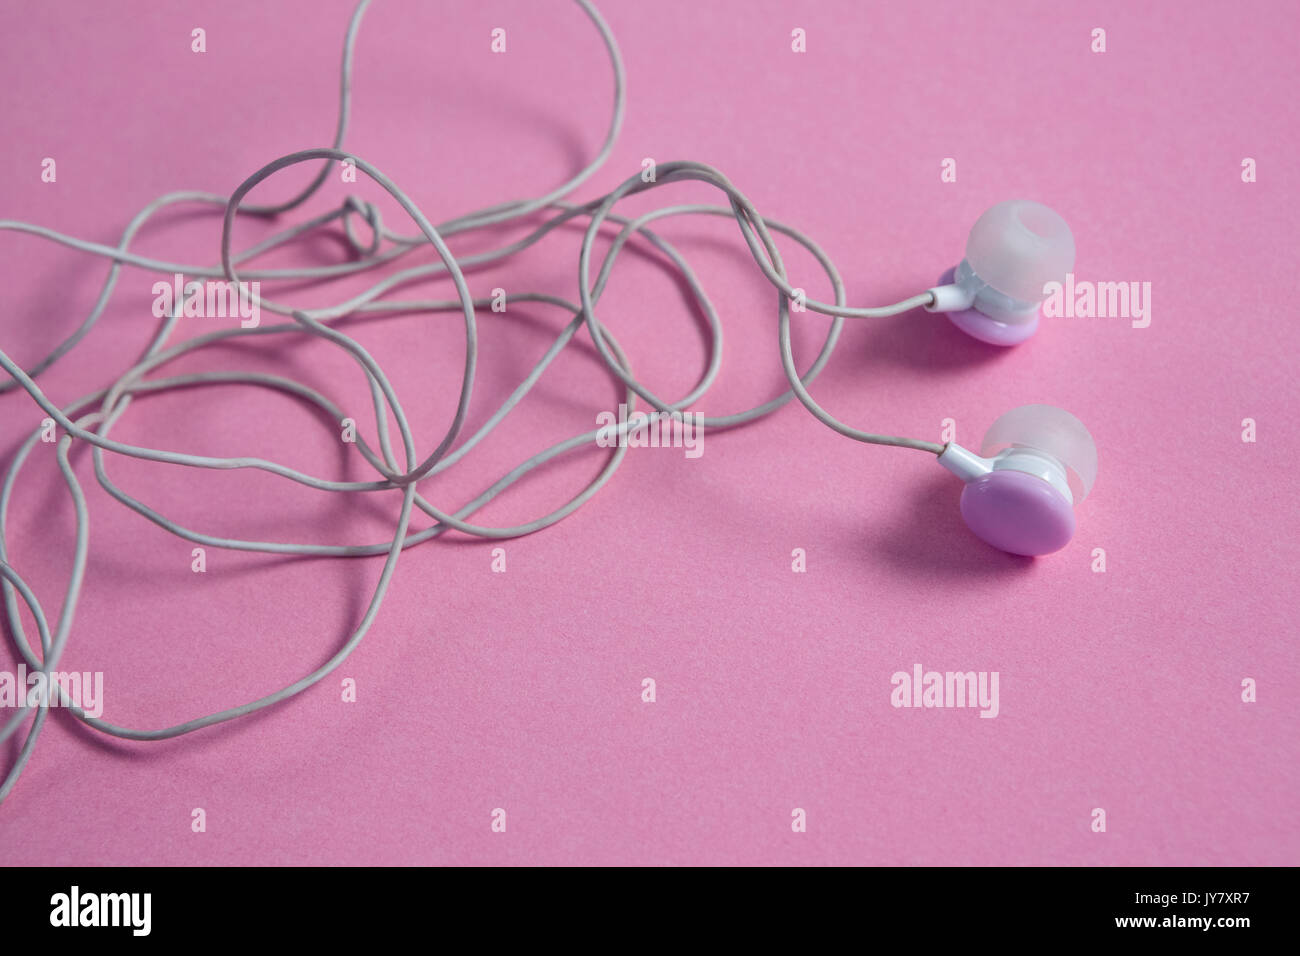 Close-up of pink earphones on pink background Stock Photo